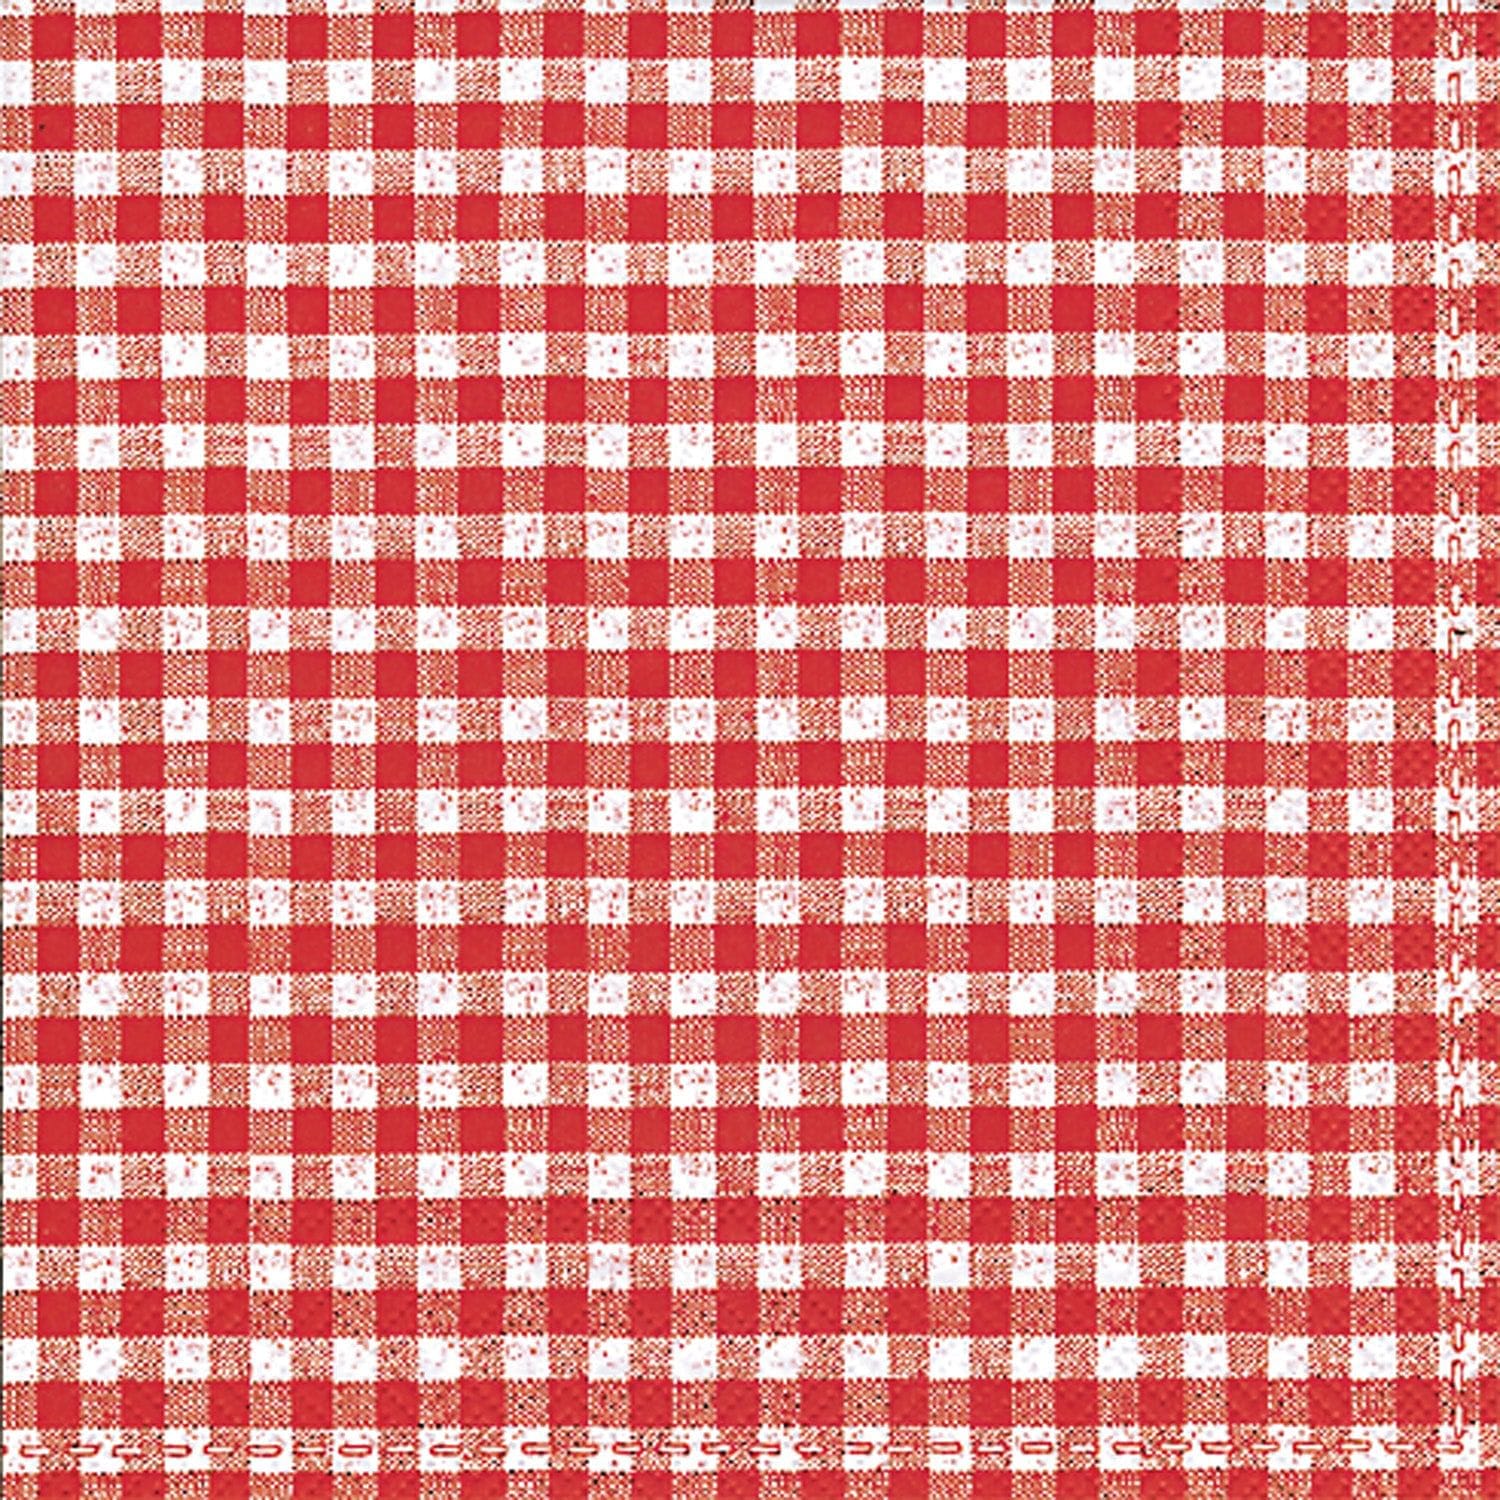 Vichy Bavaria Red Cocktail Napkin - Shelburne Country Store